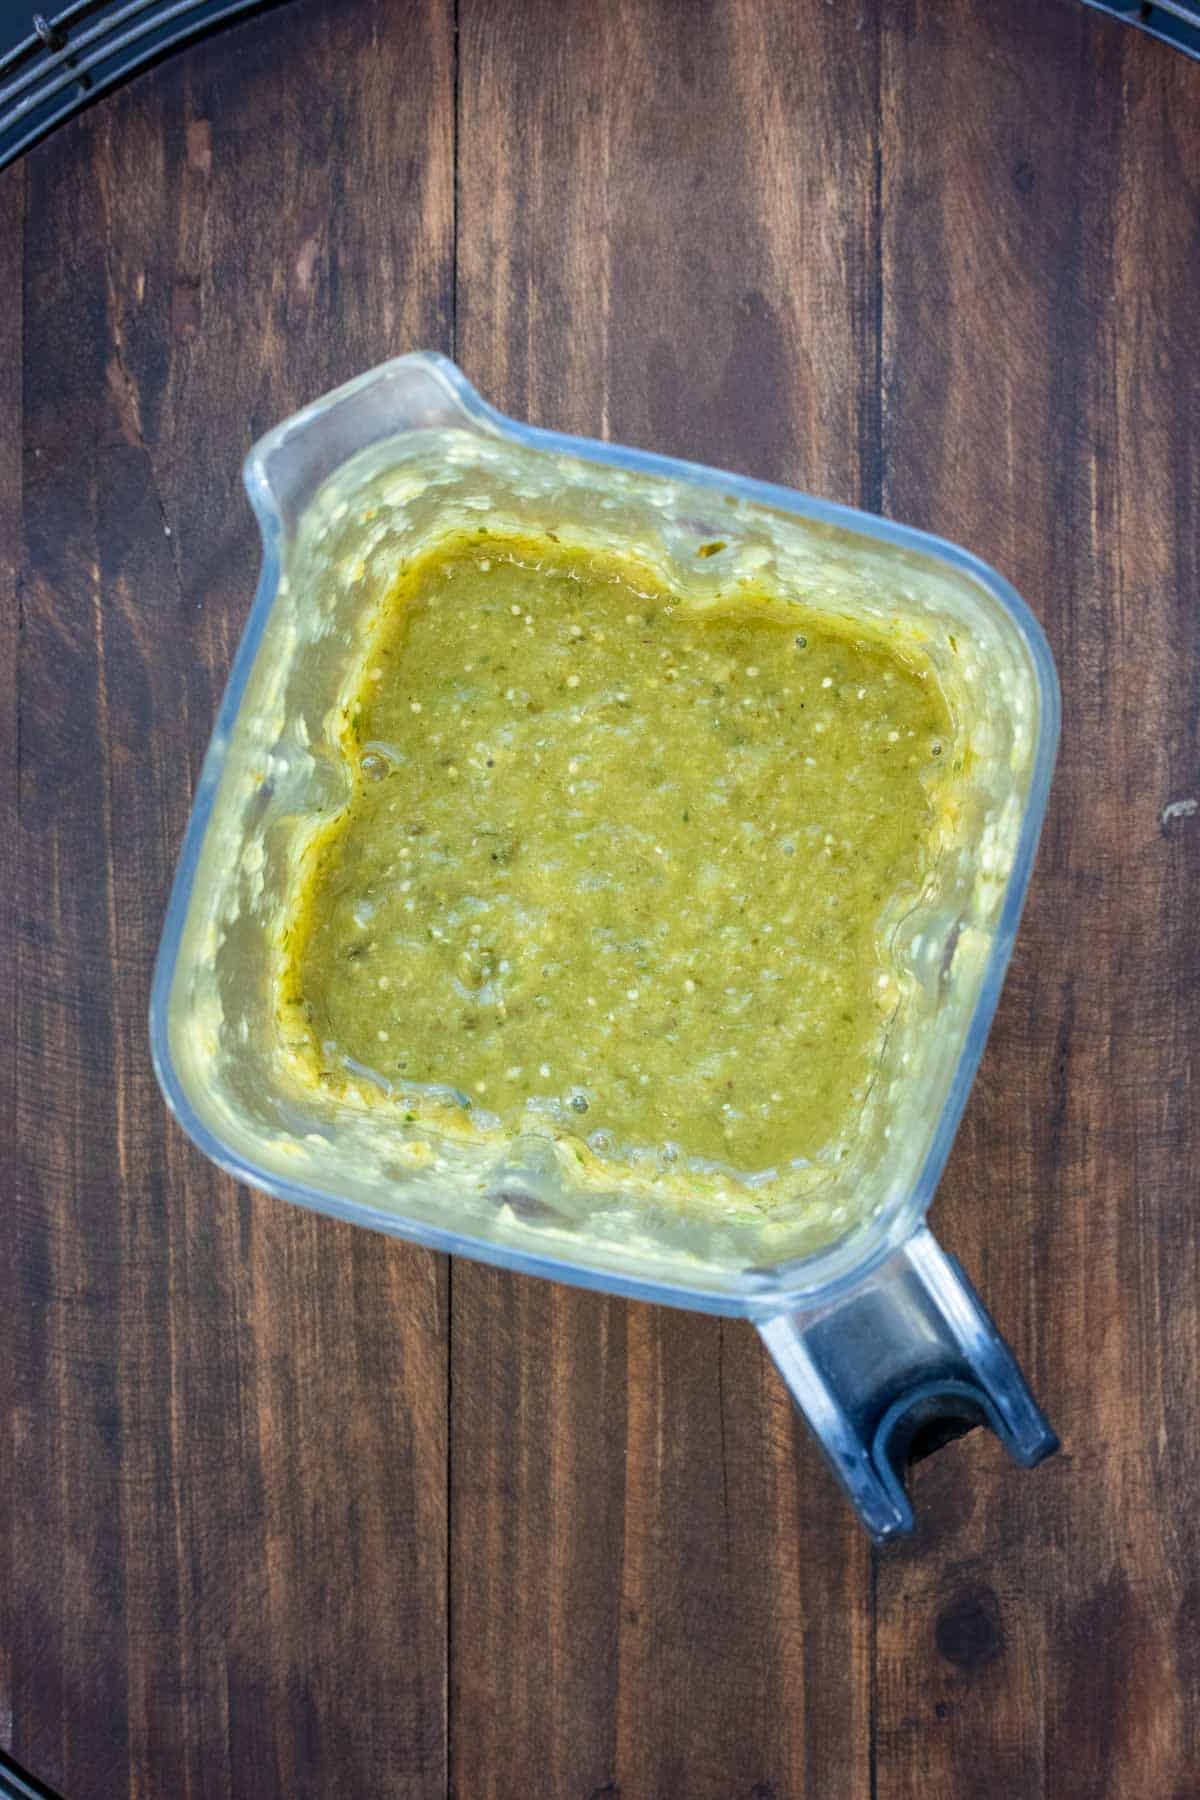 Top view of a blender with green sauce in it.